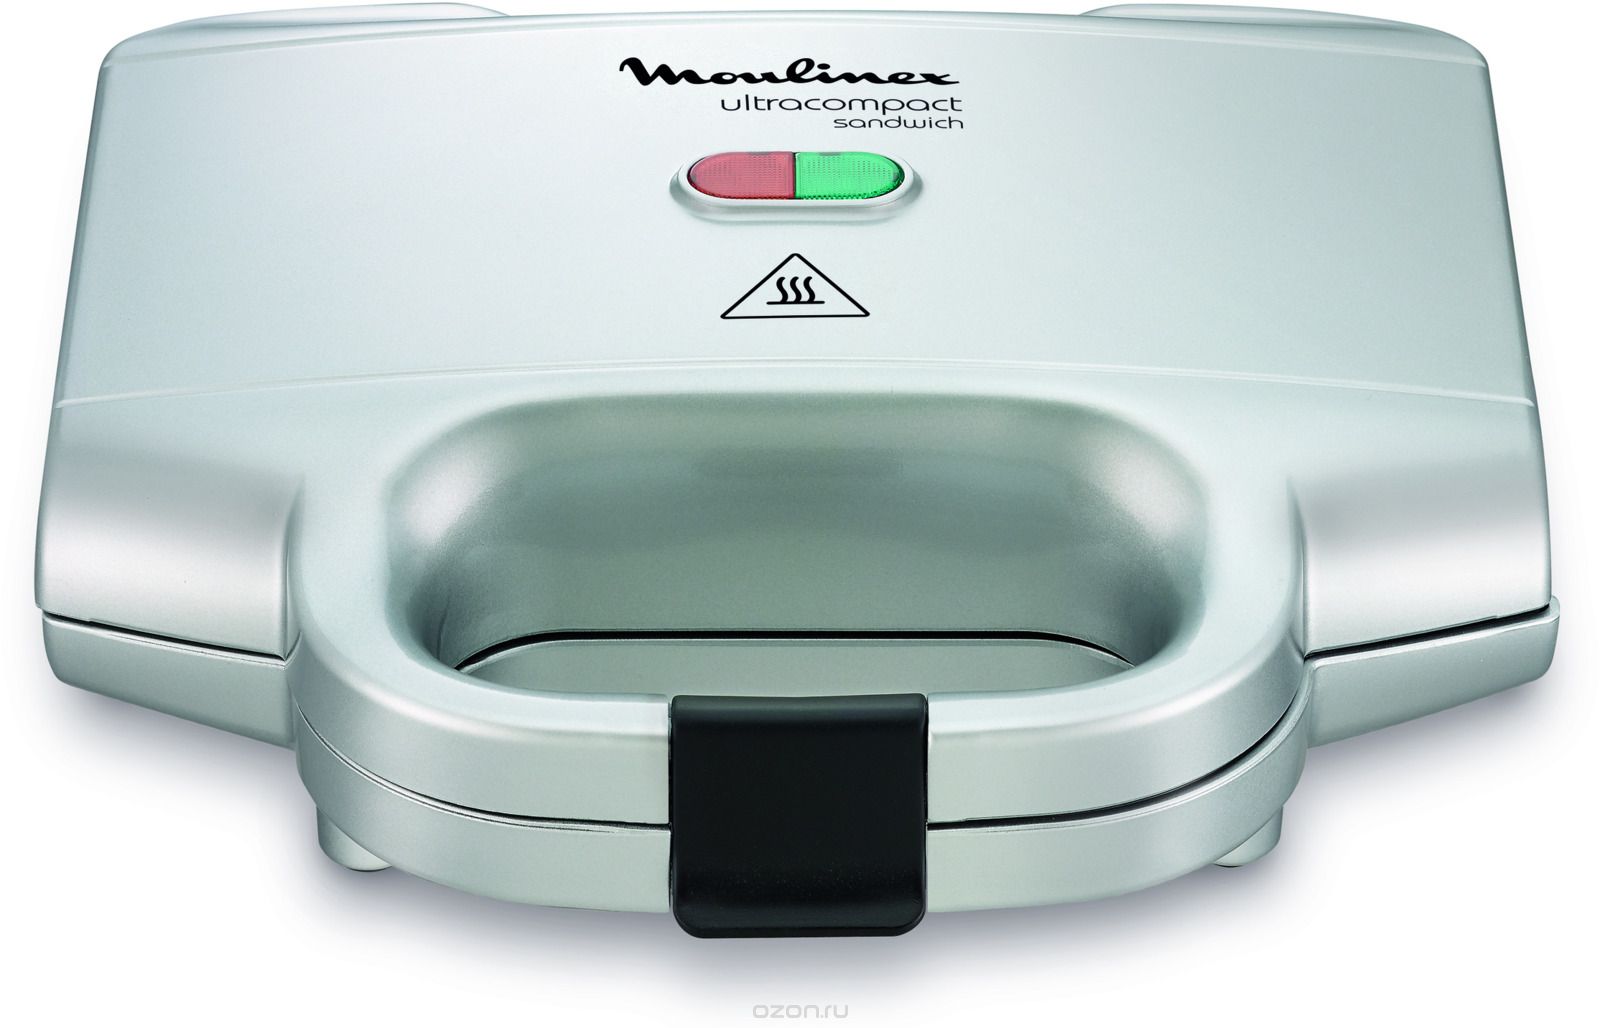  Moulinex SM1541 Ultracompact, Silver